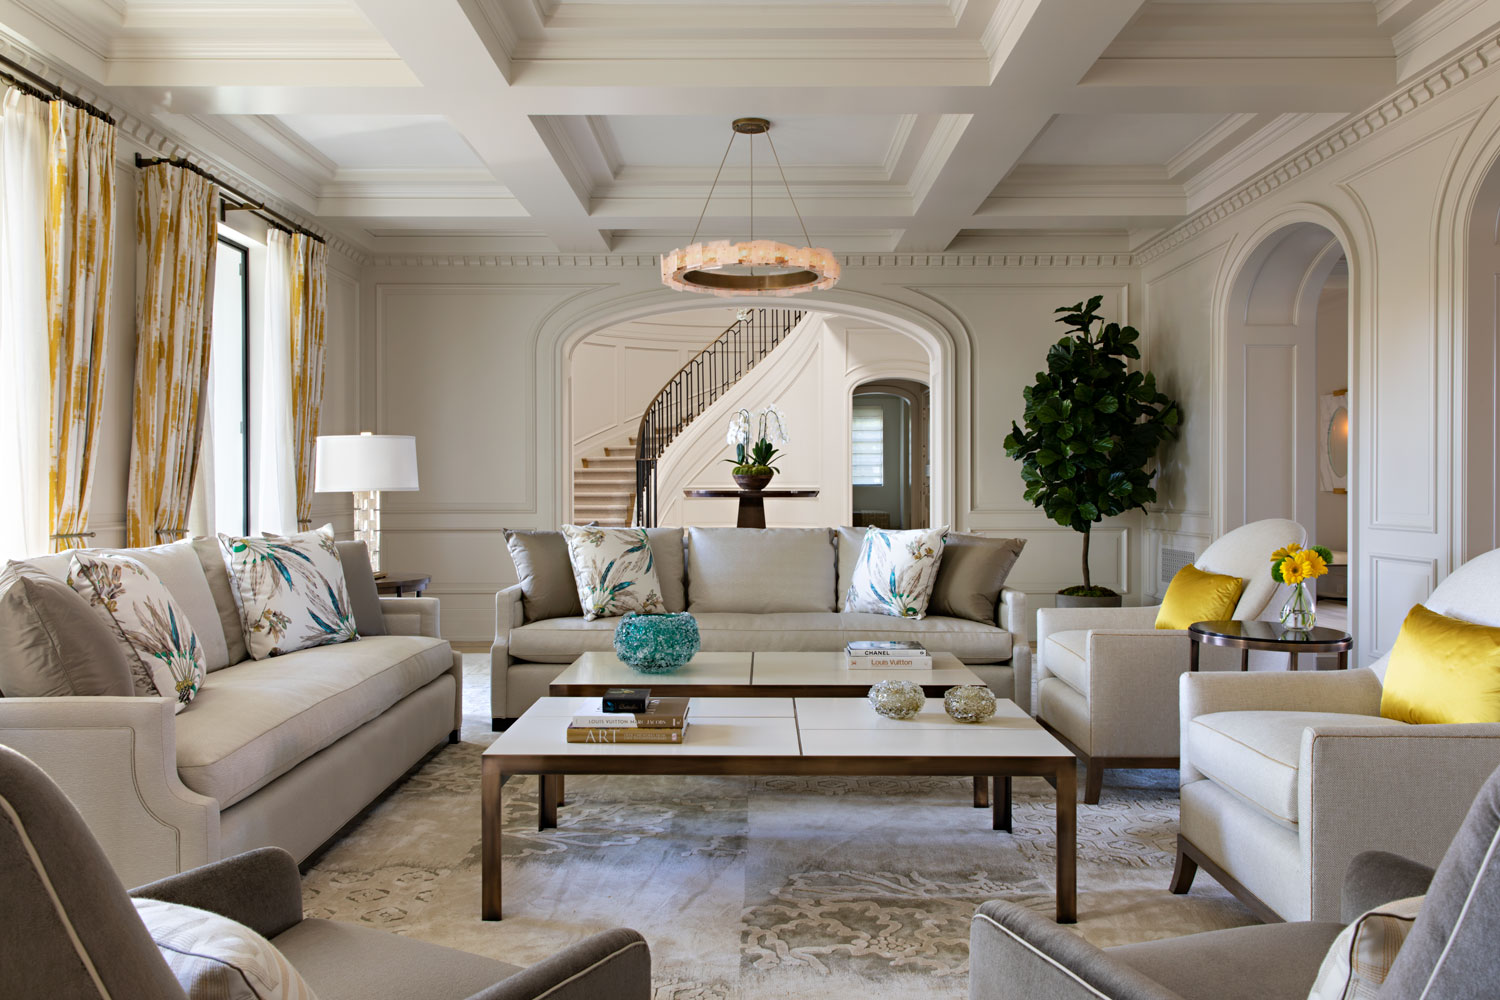 04-transitional-living-room-coffered-ceiling-arched-doorway-gary-drake-general-contractor.jpg